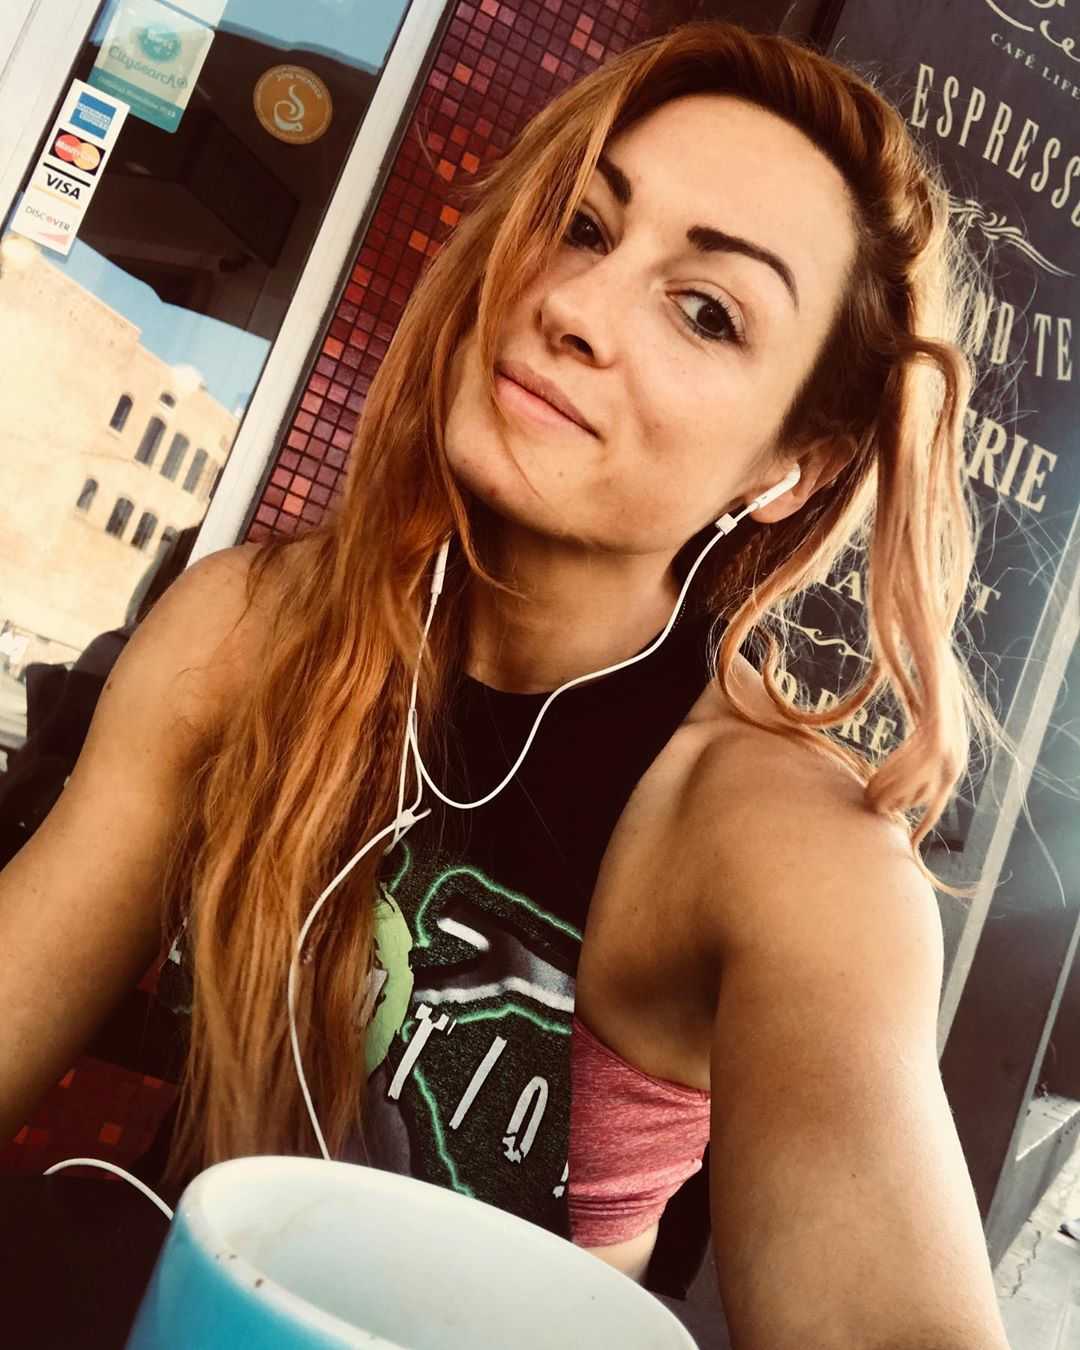 70+ Hot And Sexy Pictures of Becky Lynch – WWE Diva Will Sizzle You Up 31